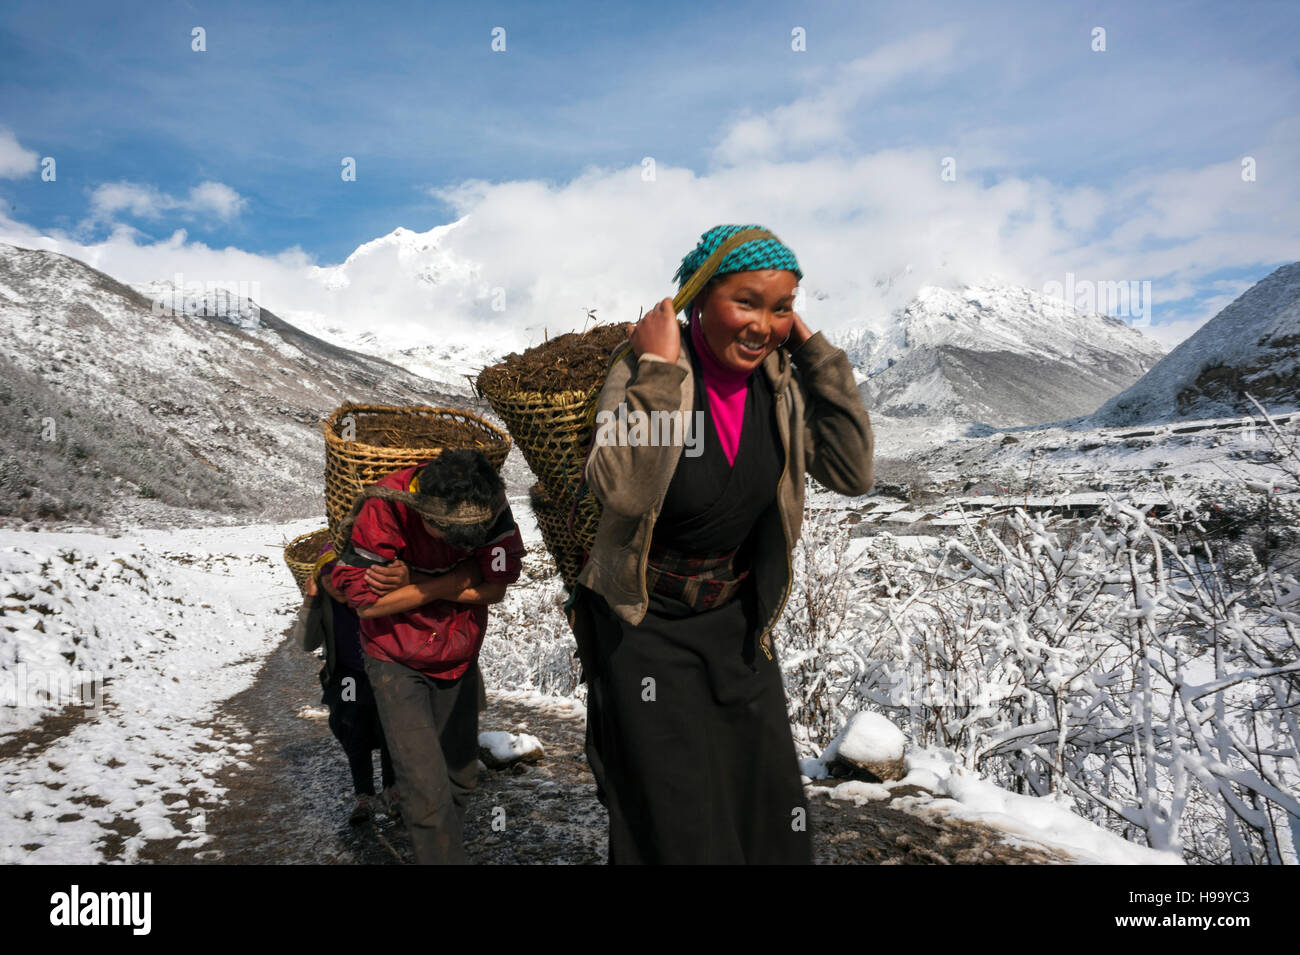 Villagers leaving the village of Samagaon, 8 days walking from the trailhead at Arughat Bazaar on the Manaslu Circuit. The 16-day Manaslu Circuit is p Stock Photo